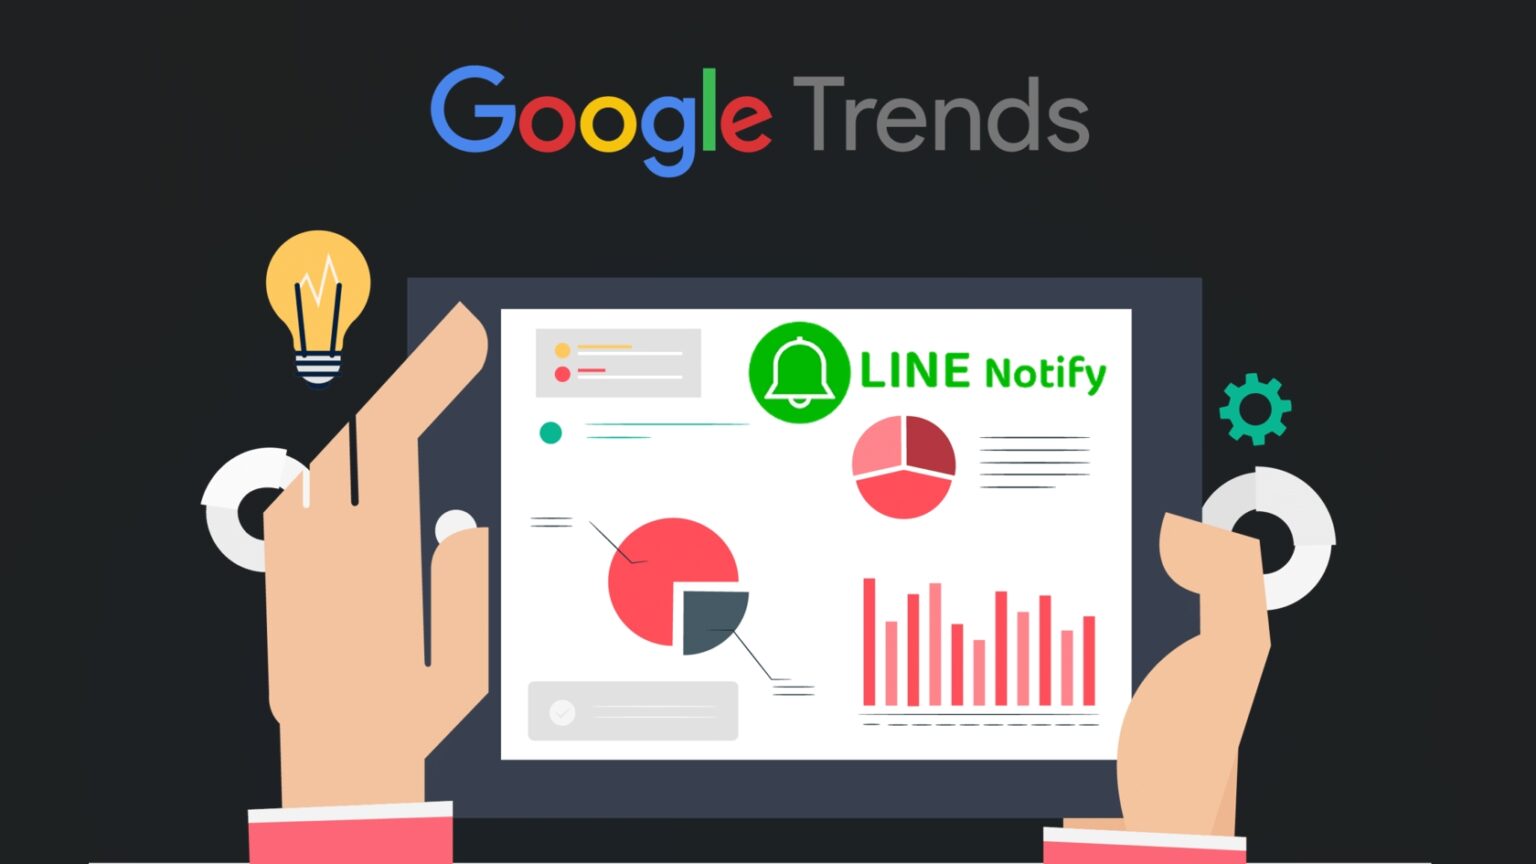 google-trends-to-line-notify-13